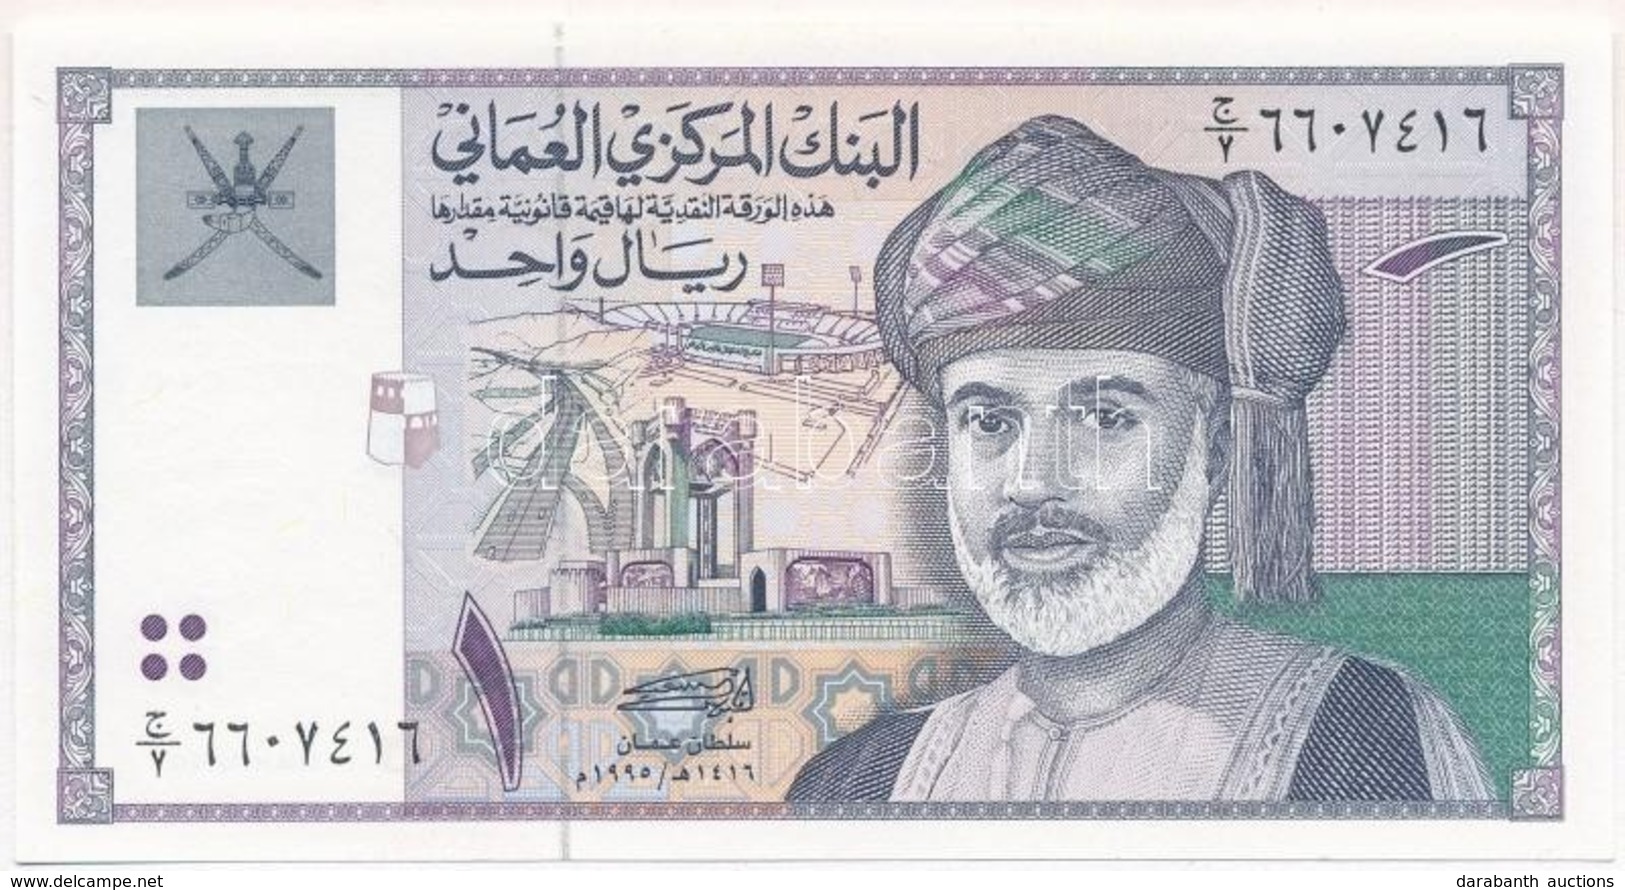 Omán 1995. 1R T:I 
Oman 1995. 1 Rial C:UNC 
Krause 34 - Unclassified